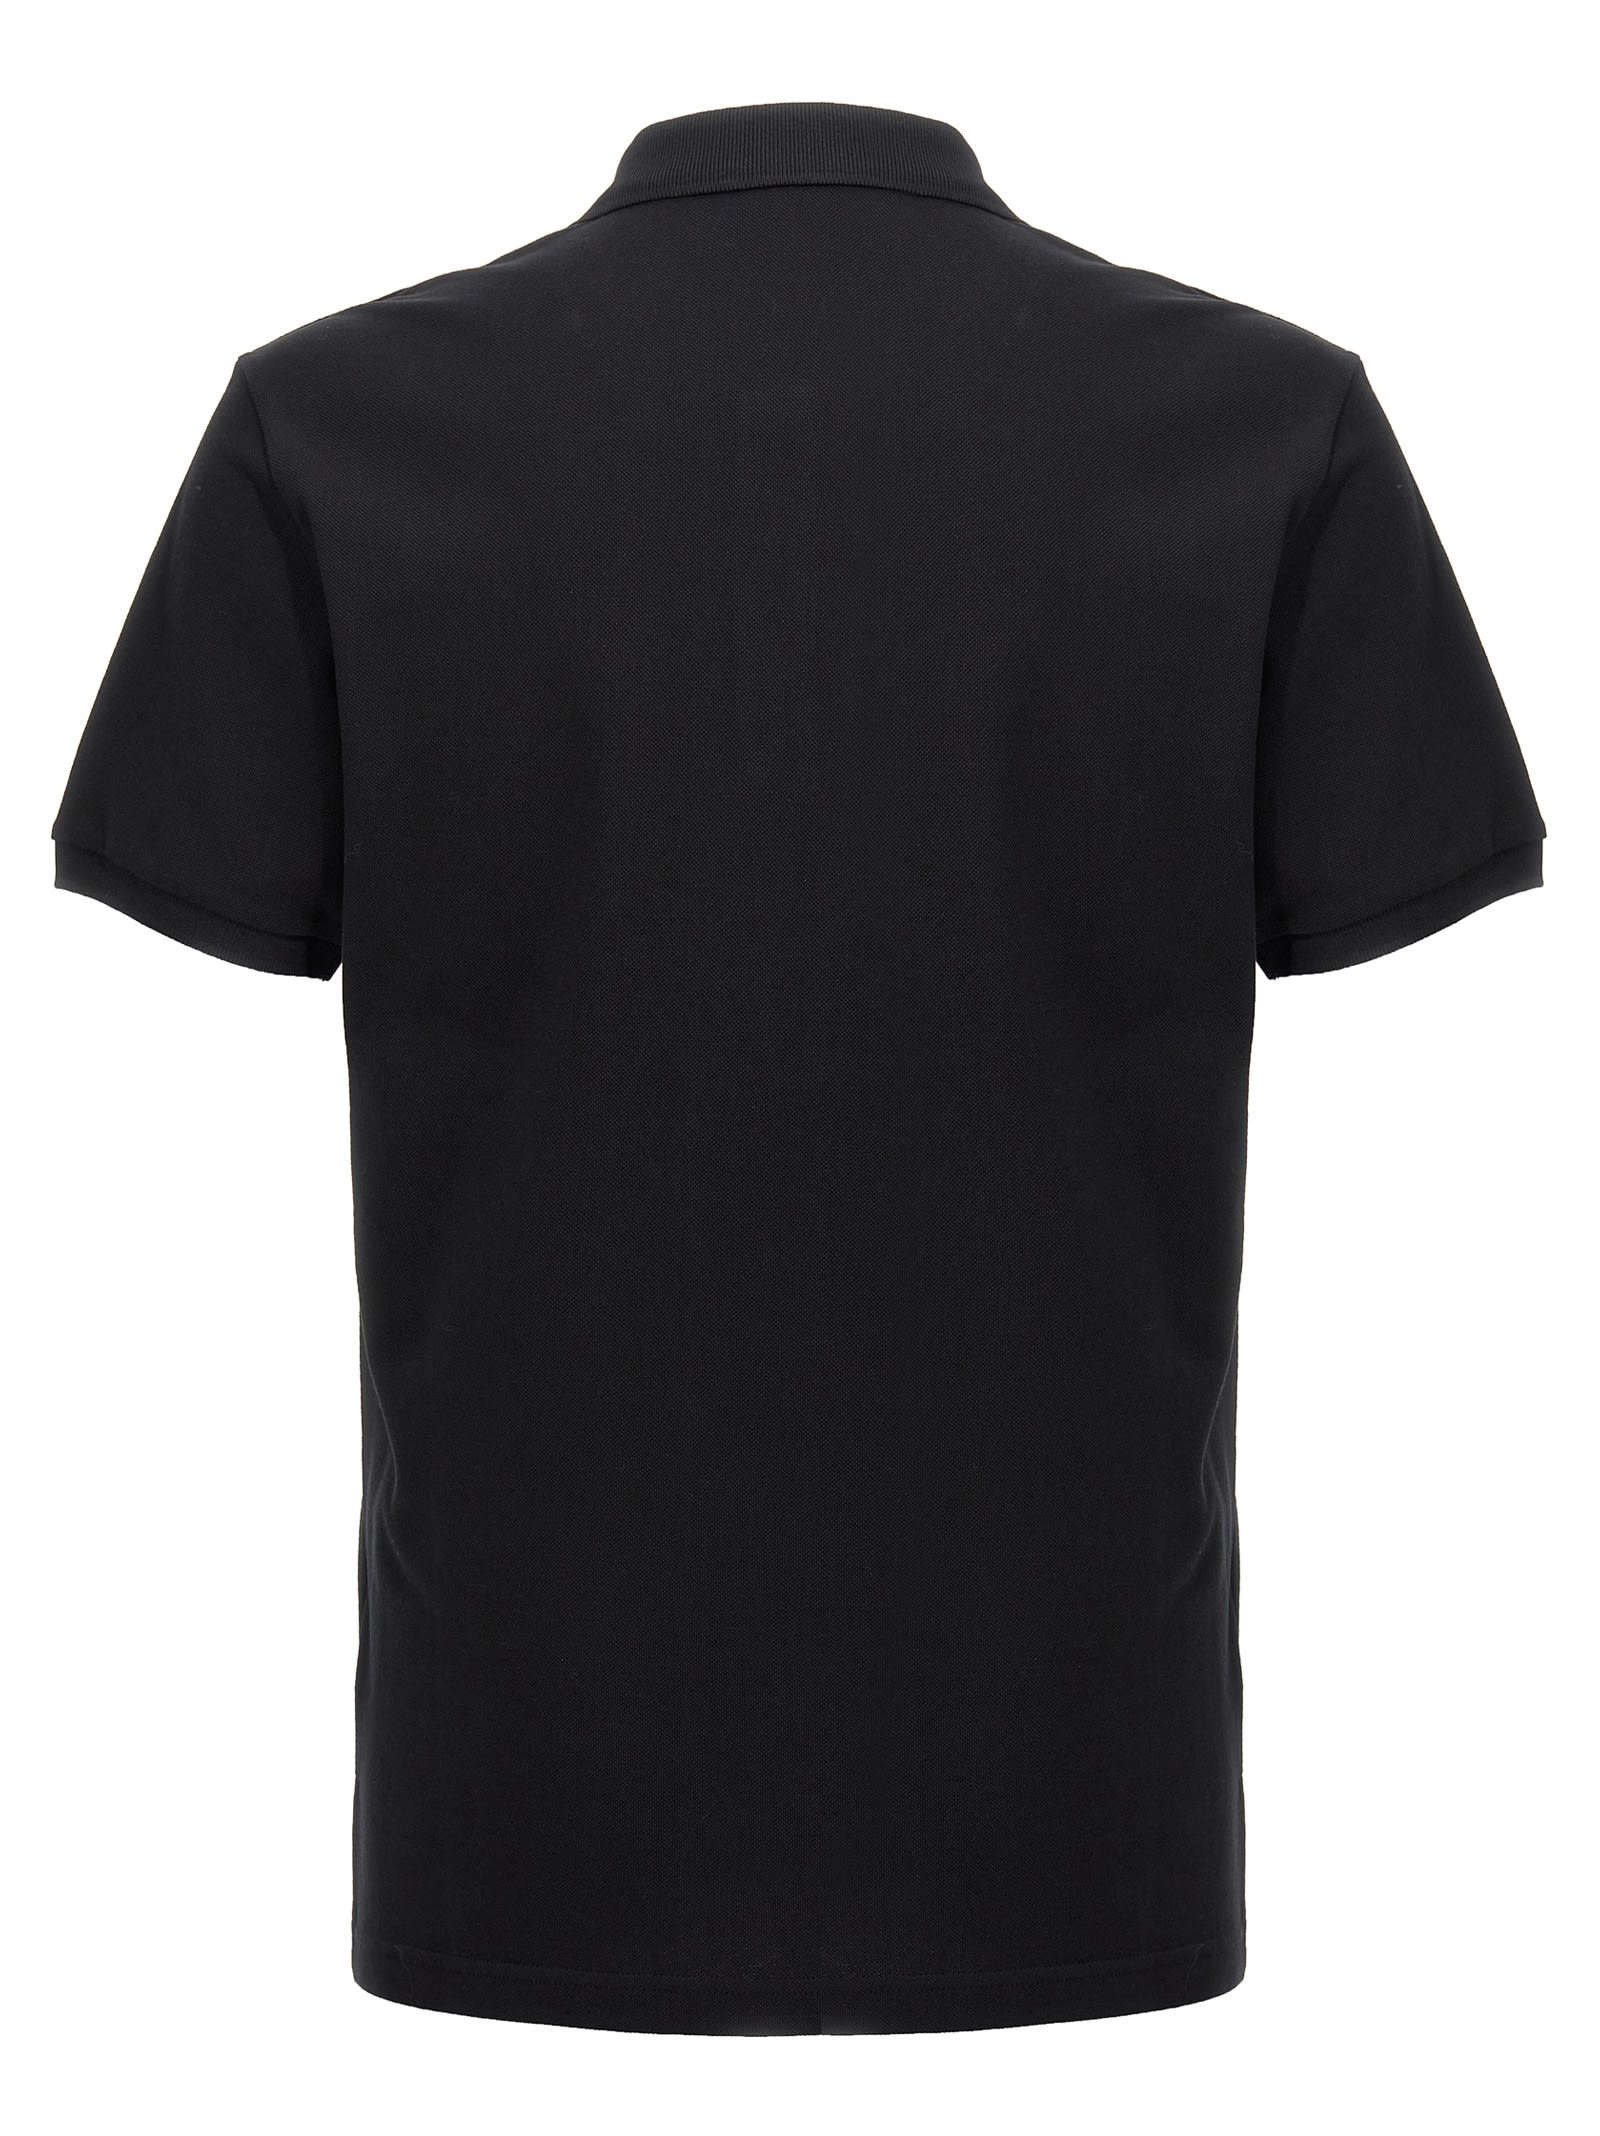 Shop Moschino In Love We Trust Polo Shirt In Black